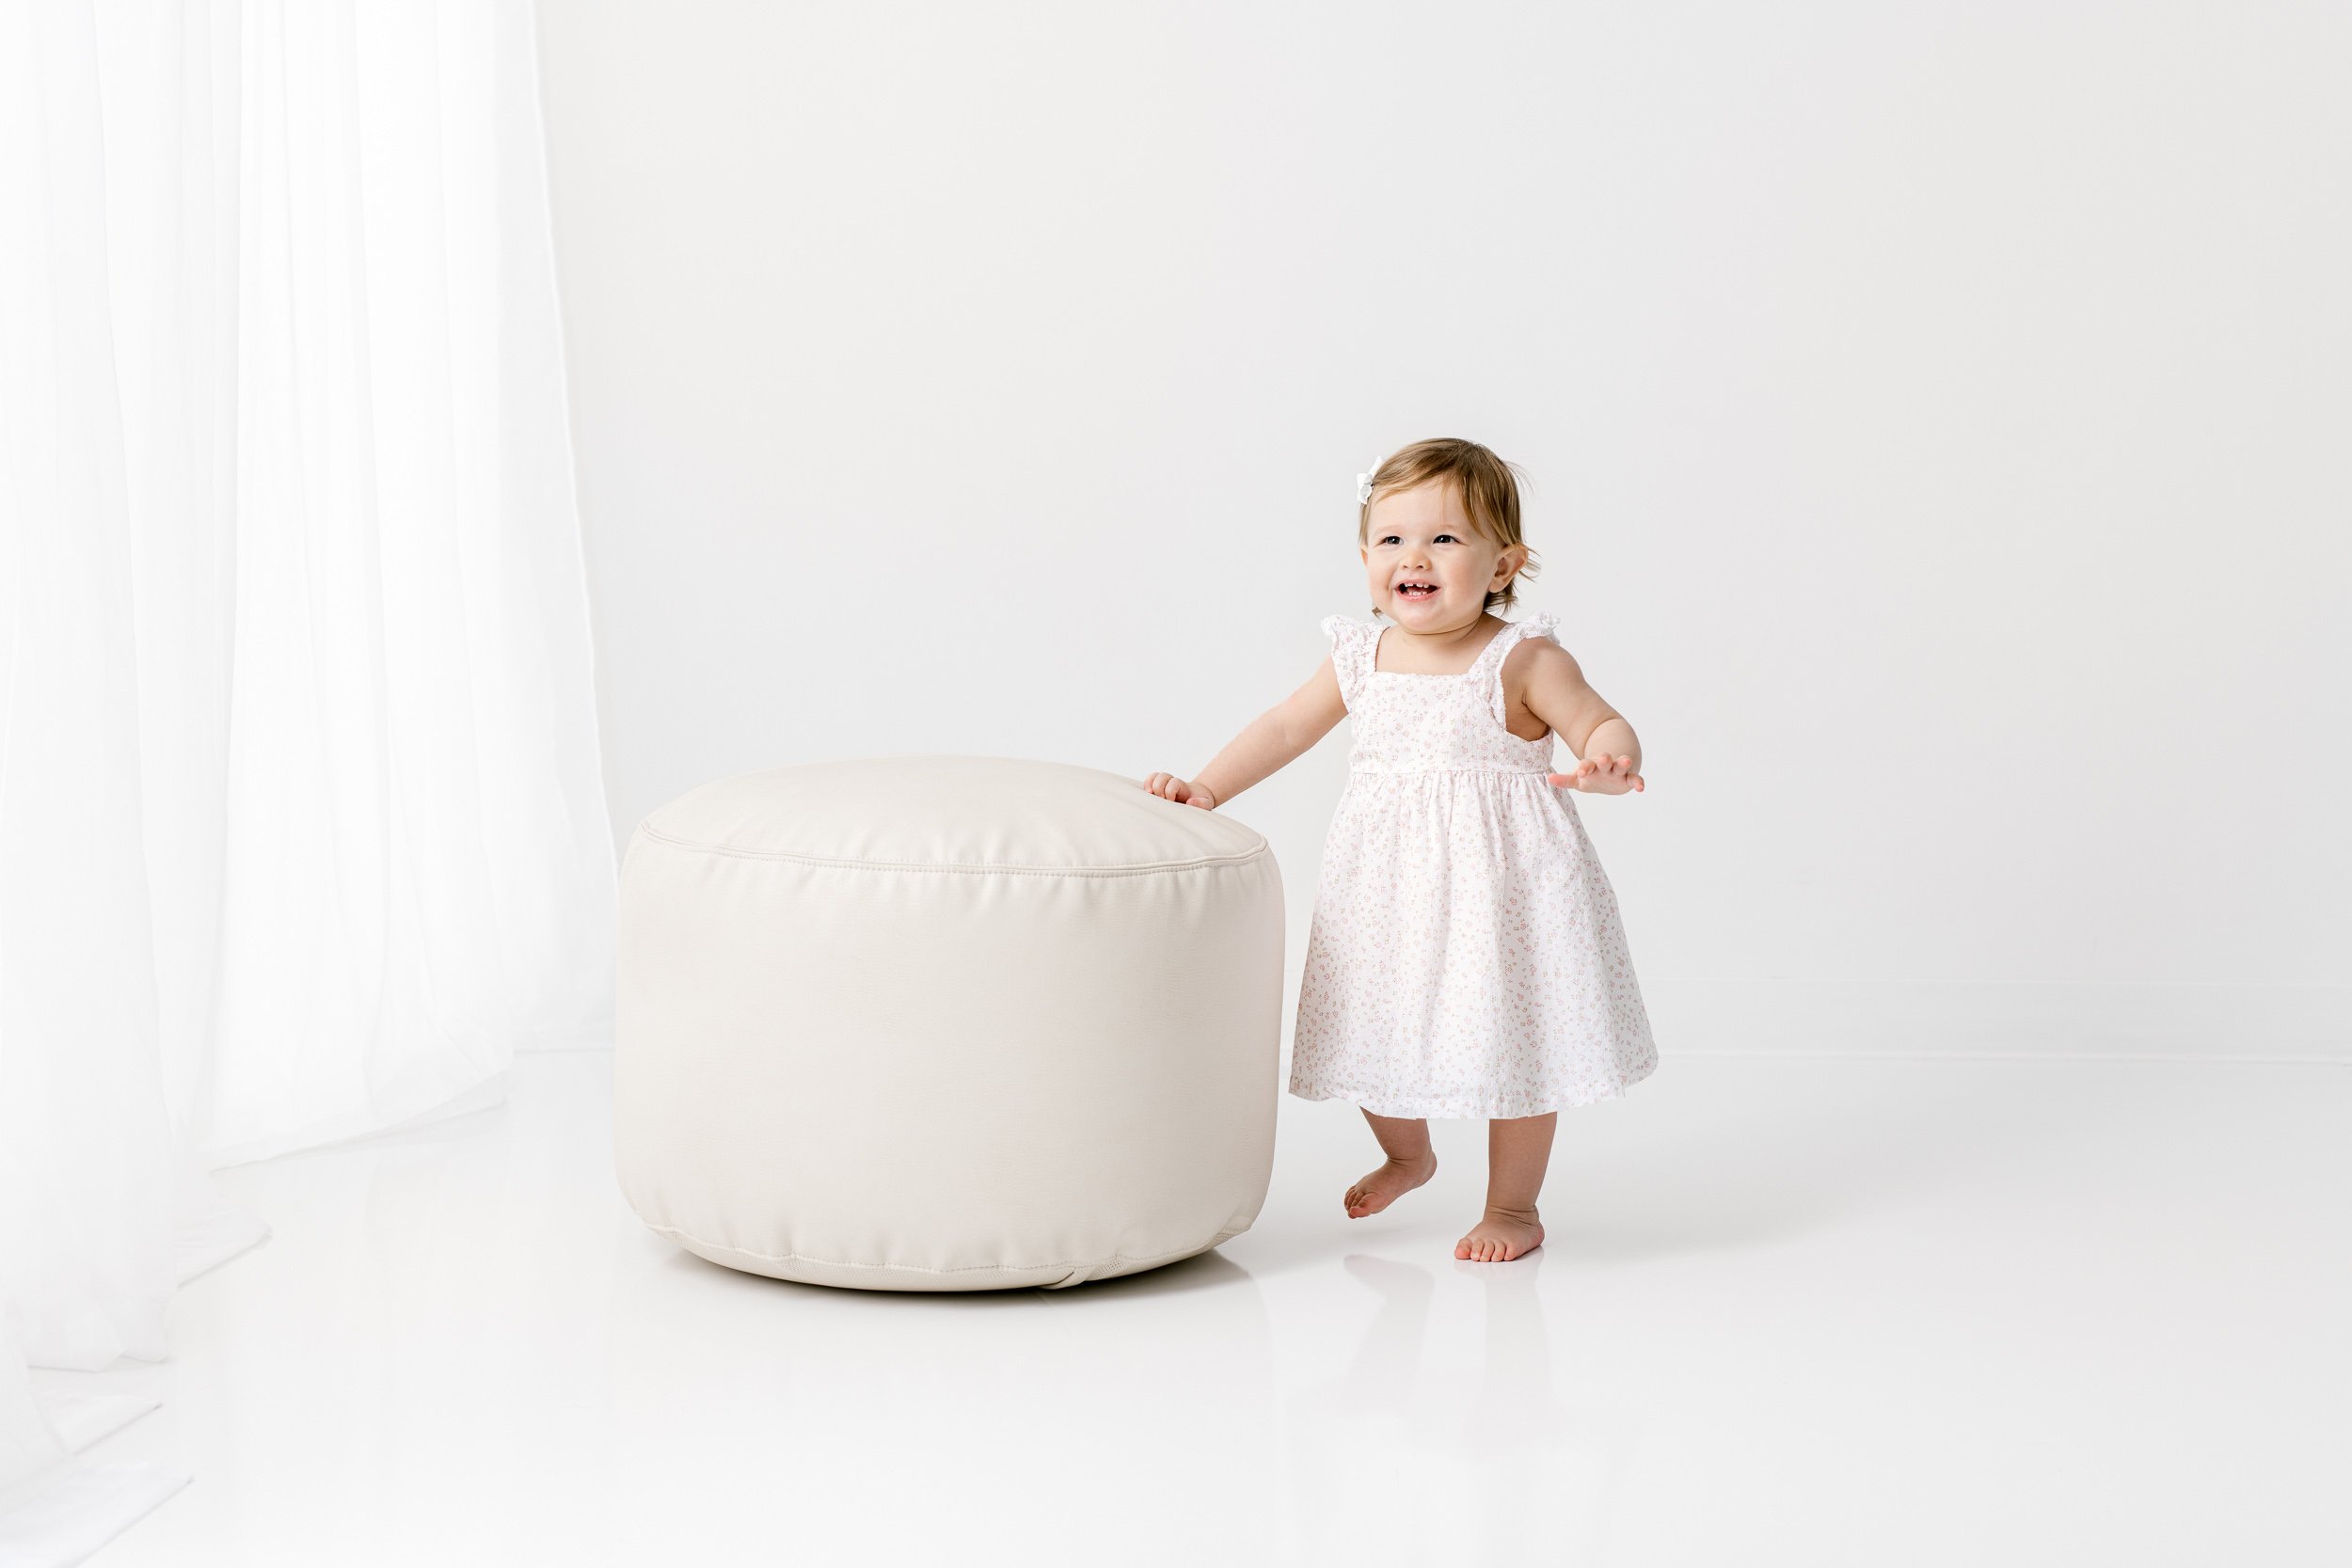  A little girl walking around a white studio during a birthday session with Nicole Hawkins Photography. laughing baby portrait #NicoleHawkinsPhotography #NicoleHawkinsBabies #studiochildren #firstbirthday #studiophotography #girlsbirthdayportraits 